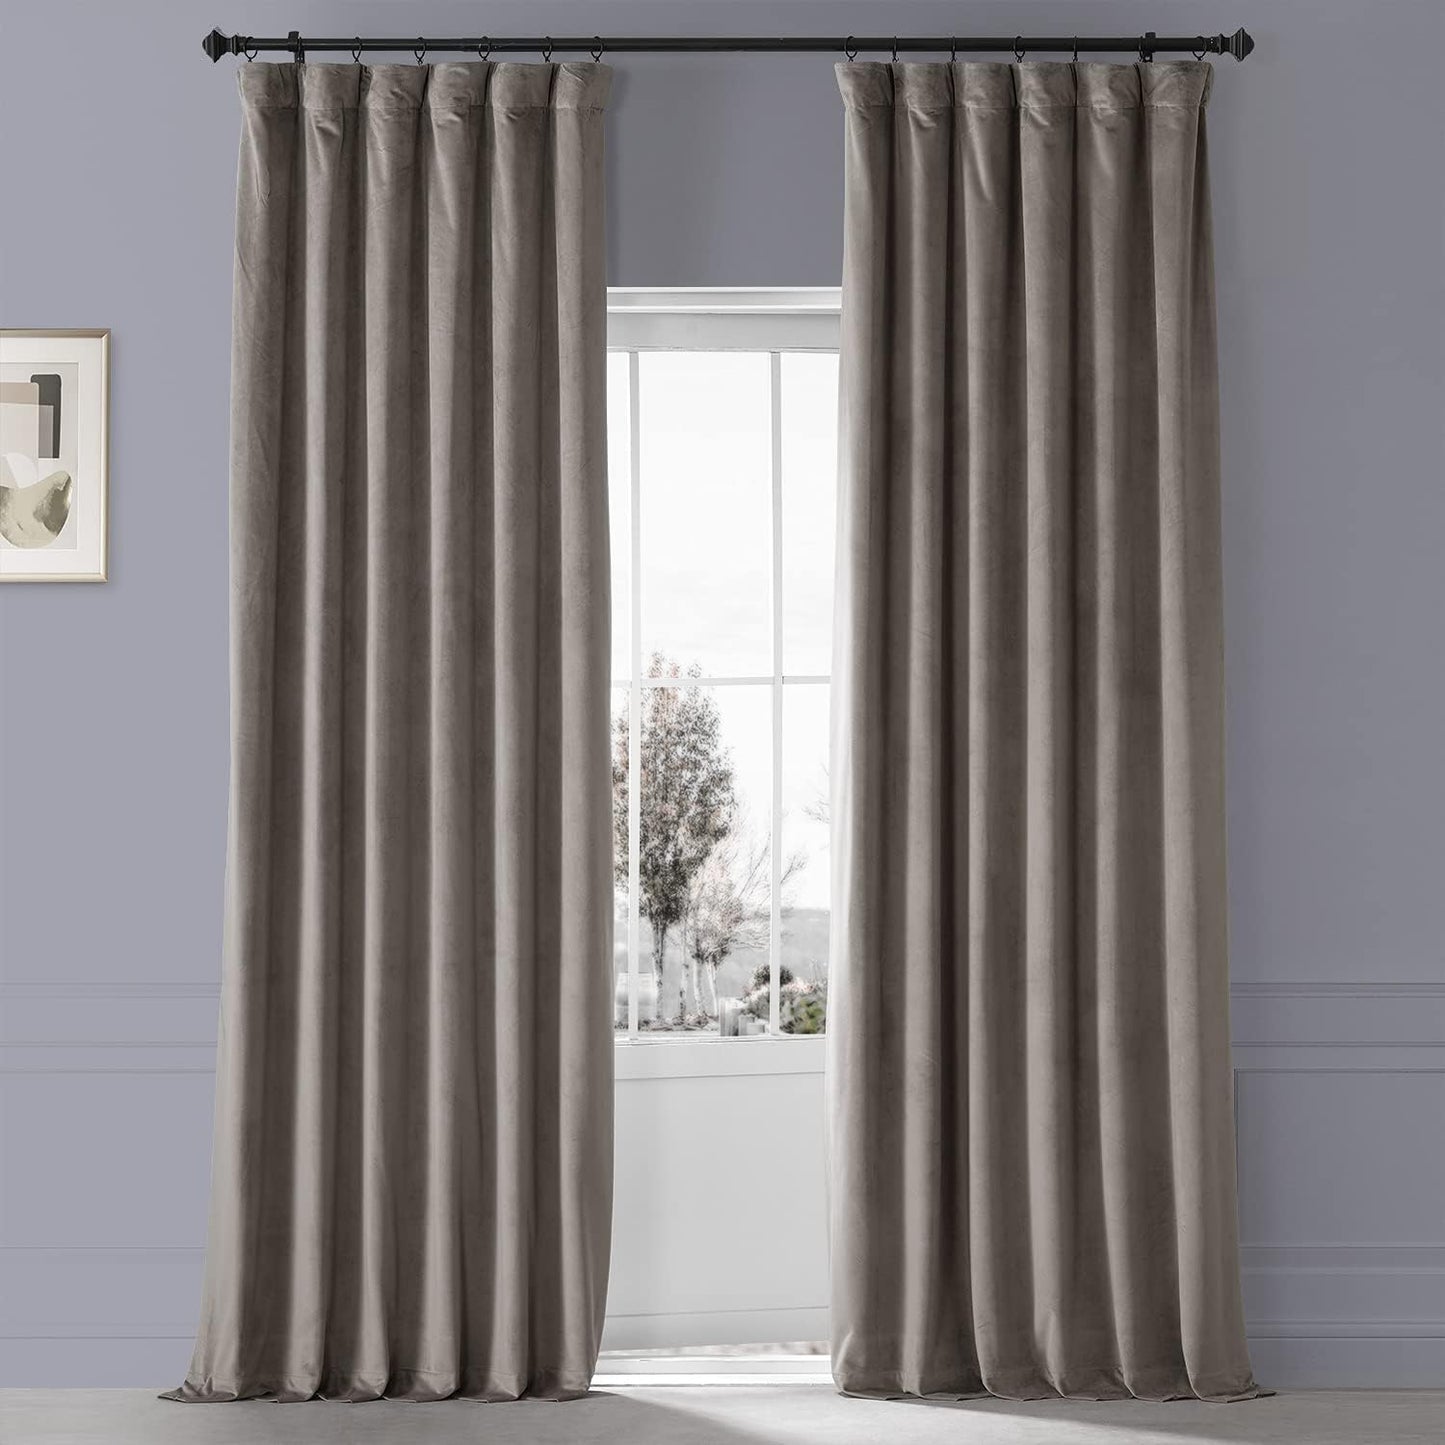 HPD HALF PRICE DRAPES Blackout Solid Thermal Insulated Window Curtain 50 X 96 Signature Plush Velvet Curtains for Bedroom & Living Room (1 Panel), VPYC-SBO198593-96, Diva Cream  Exclusive Fabrics & Furnishings Library Taupe 50 X 108 